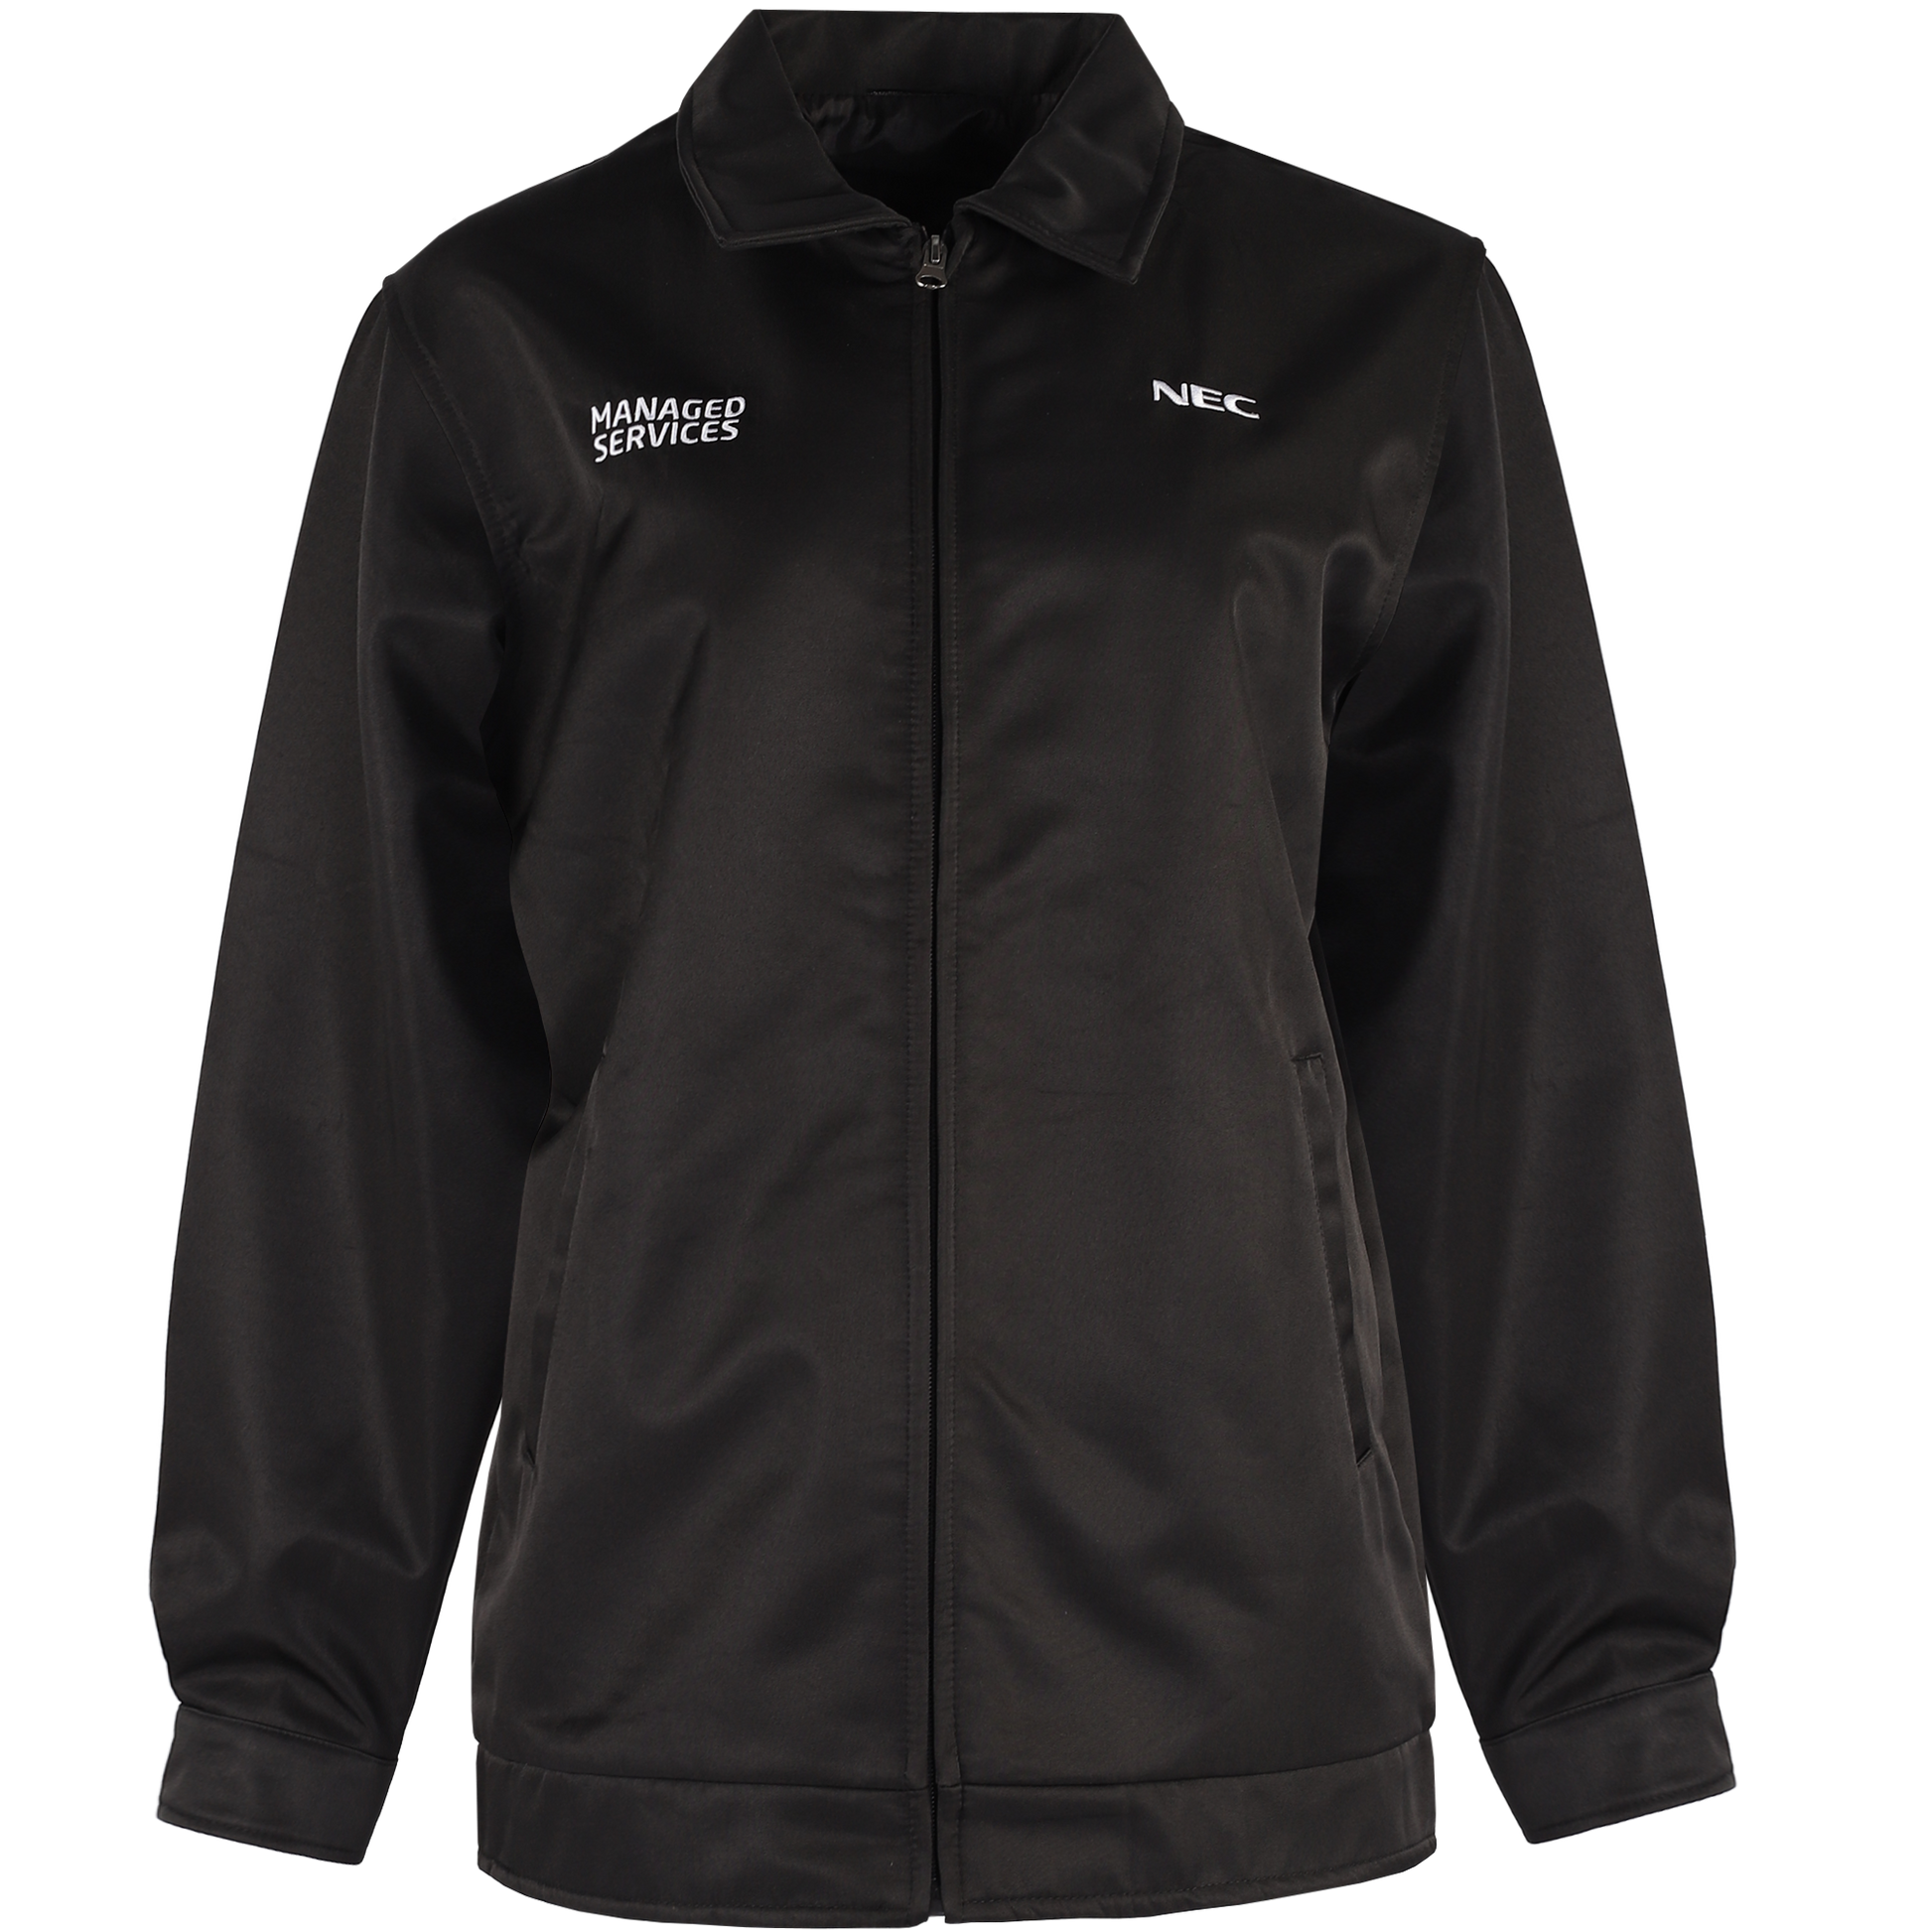 Black NEC Windbreaker with embroidery Uniform designed by CYC